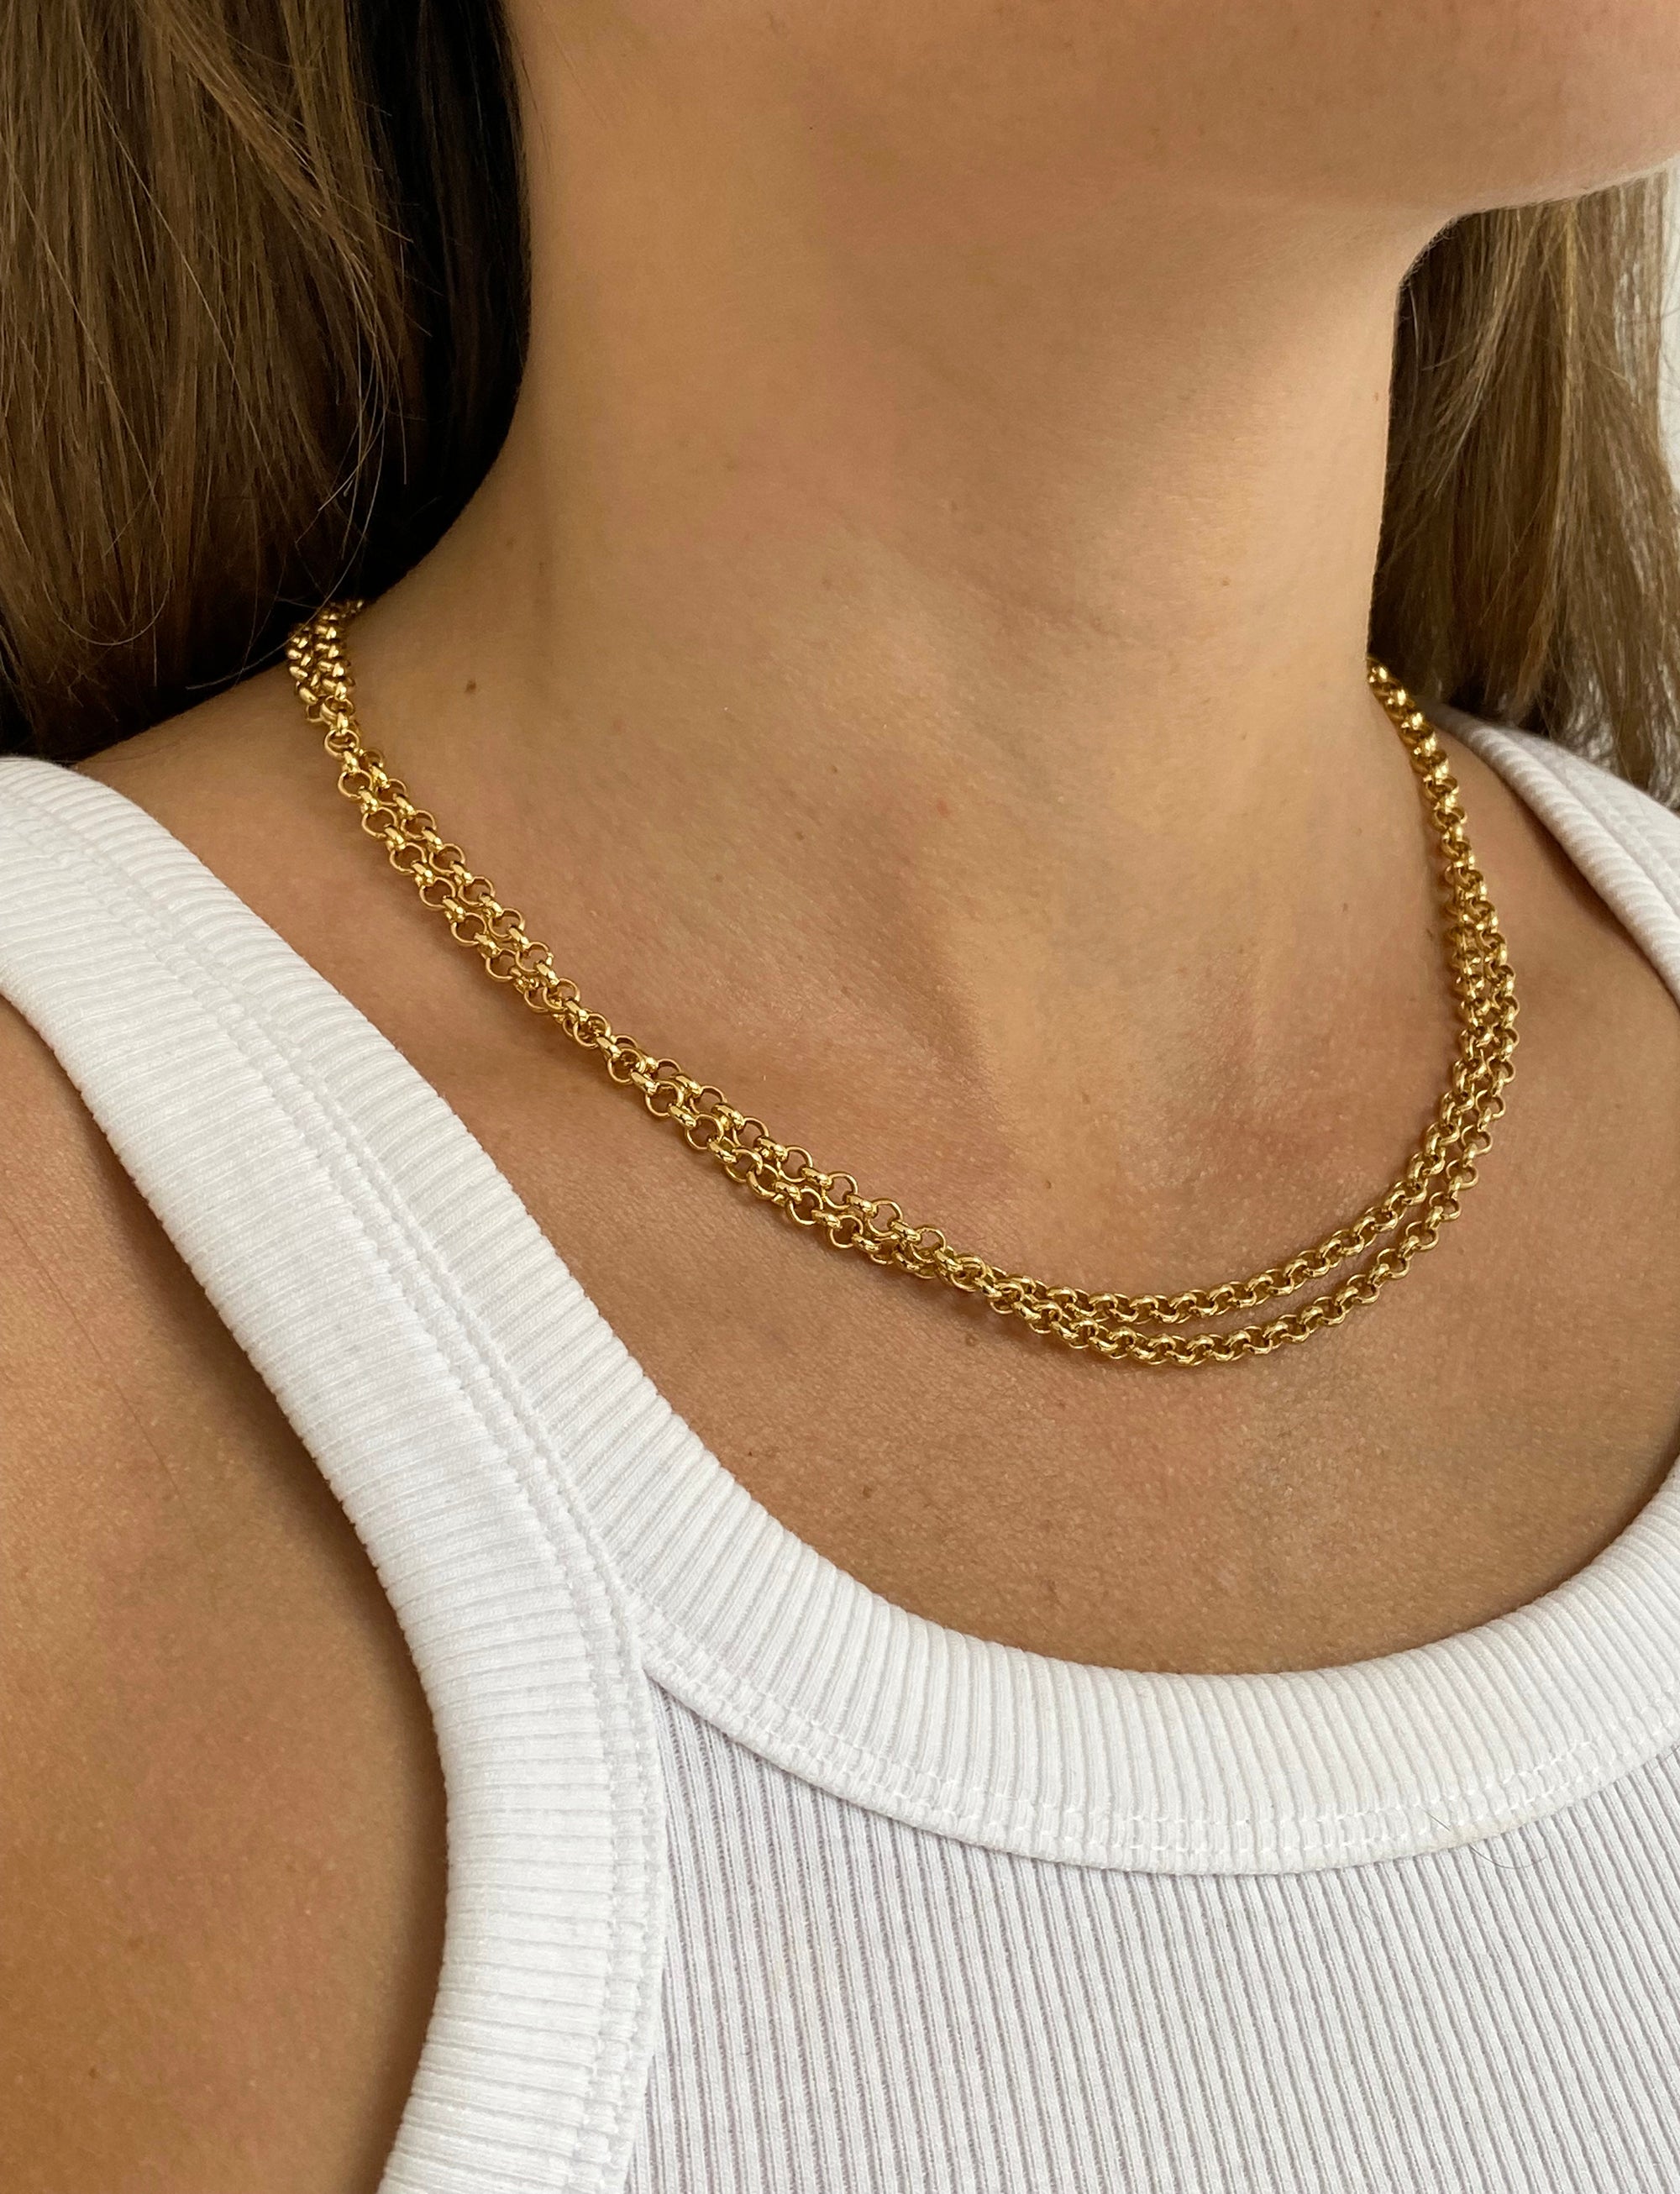 Refined Women jewelry unisex gold double chain chic cnecklace - Made In Brookyn New York 2